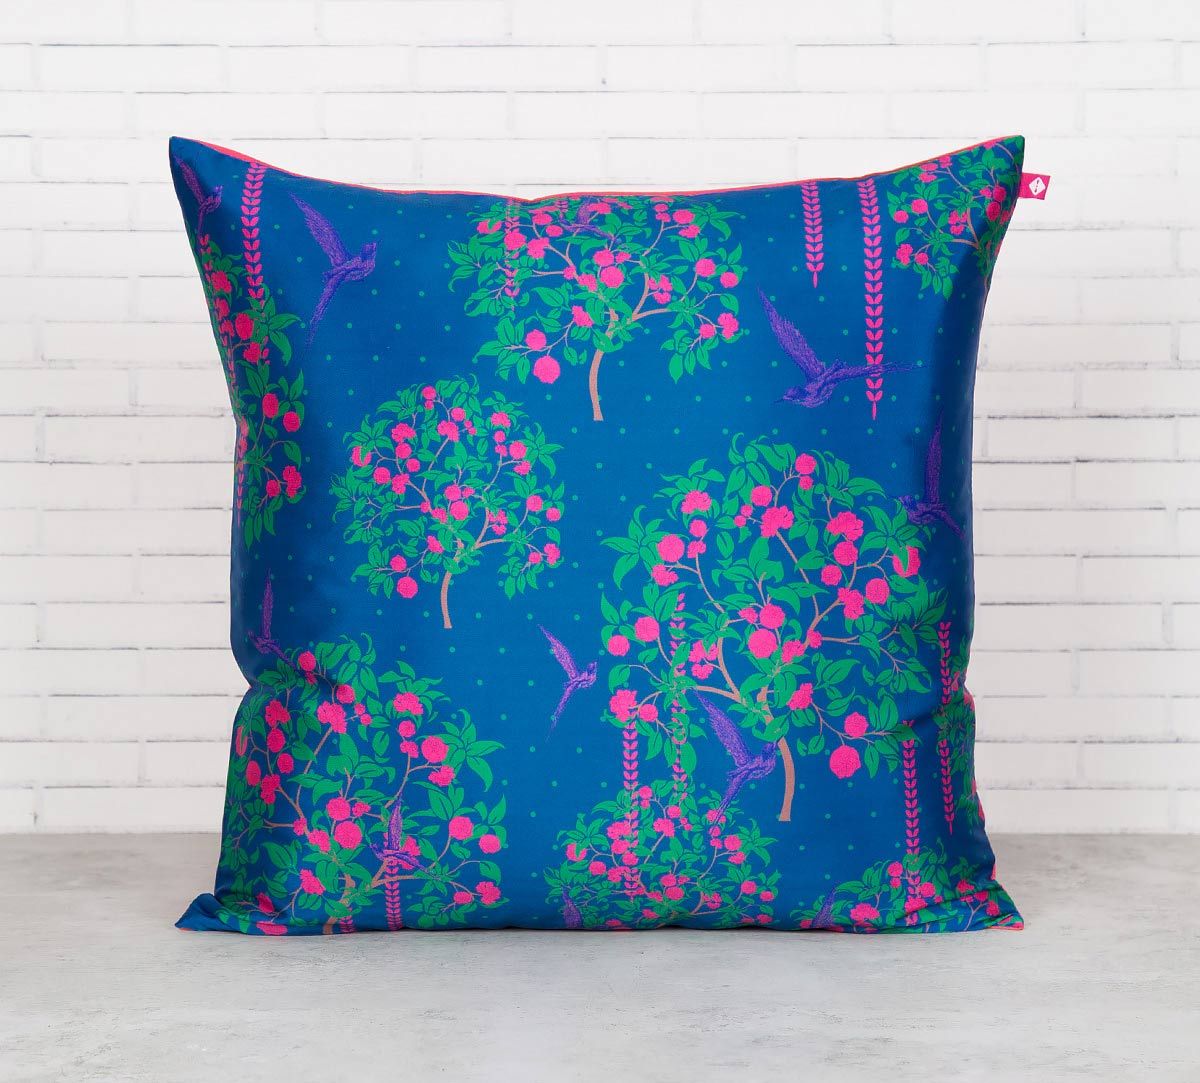 India Circus Prussian Berry Pecker Blended Taf Silk Cushion Cover